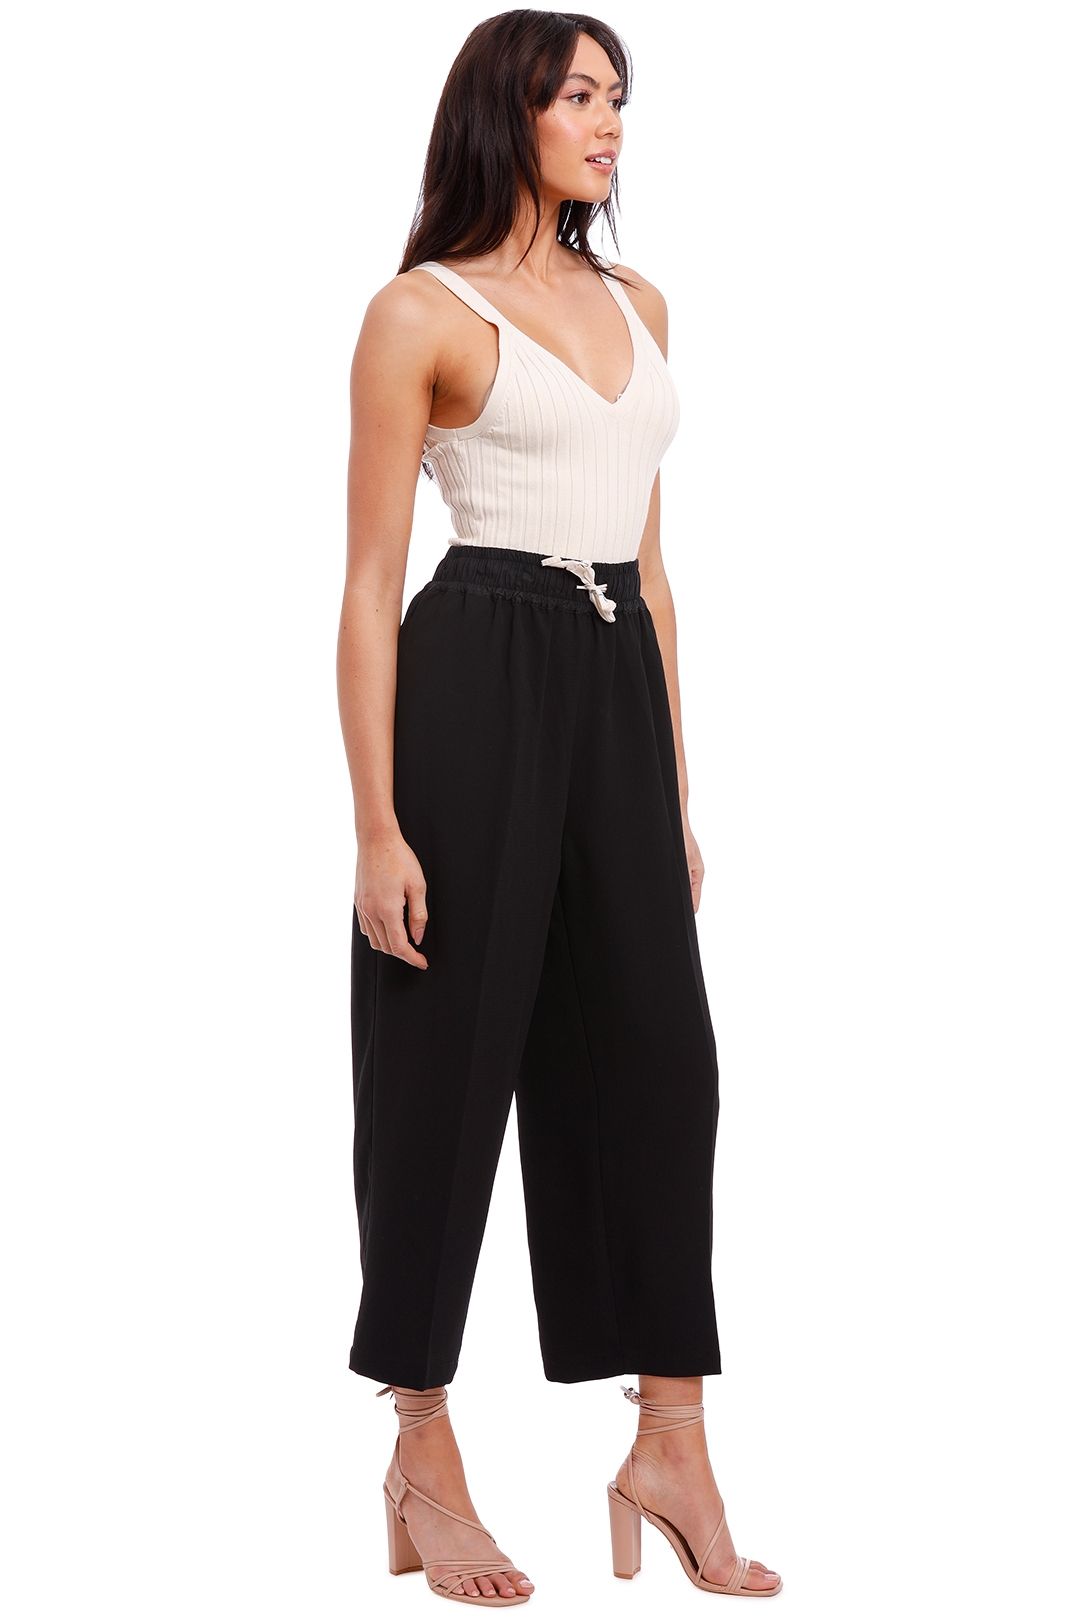 Curate by Trelise Cooper Kicking It Pant Black Ankle Length